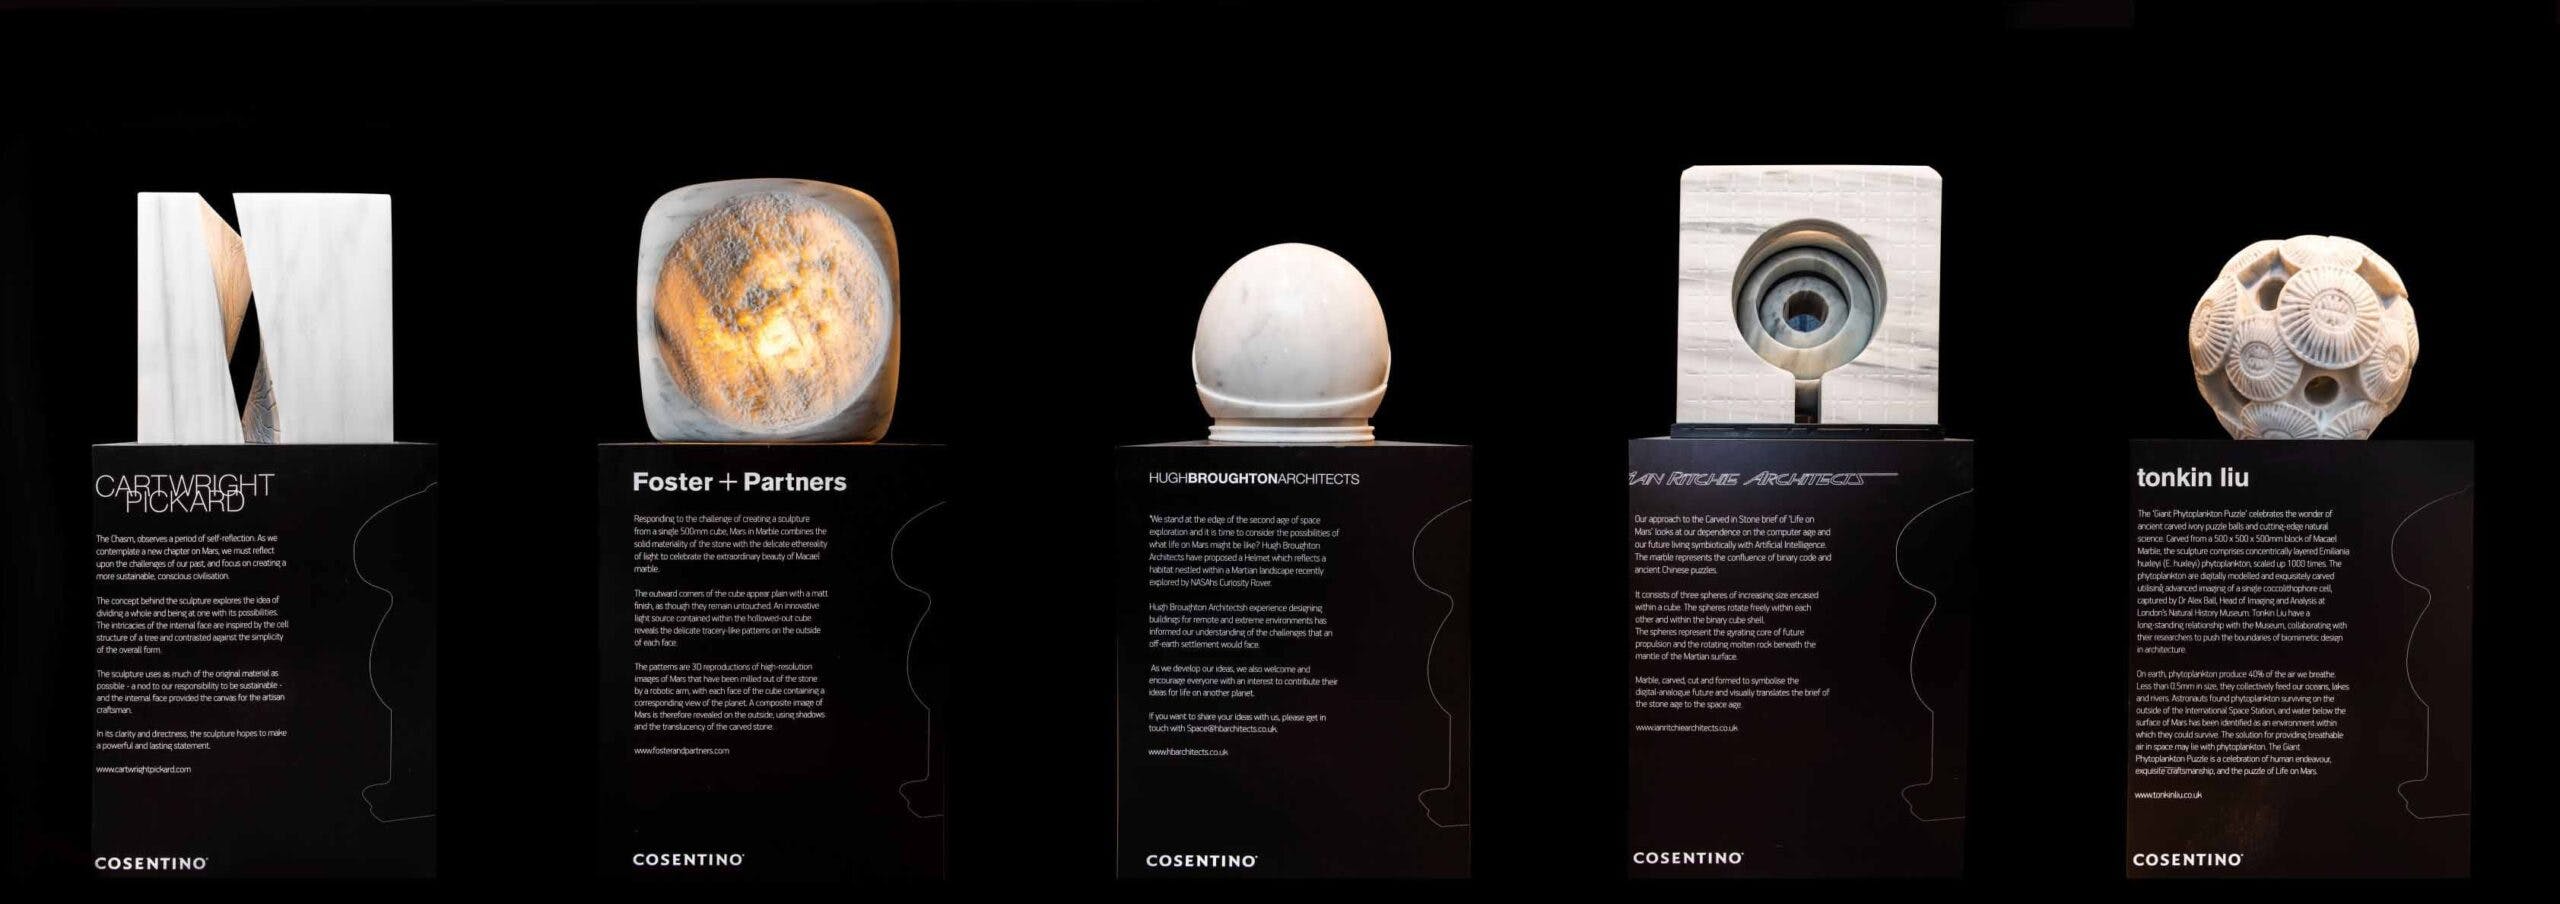 Image 38 of Carved in Stone 9 scaled in Cosentino sponsors the Madrid Design Festival 2020 - Cosentino